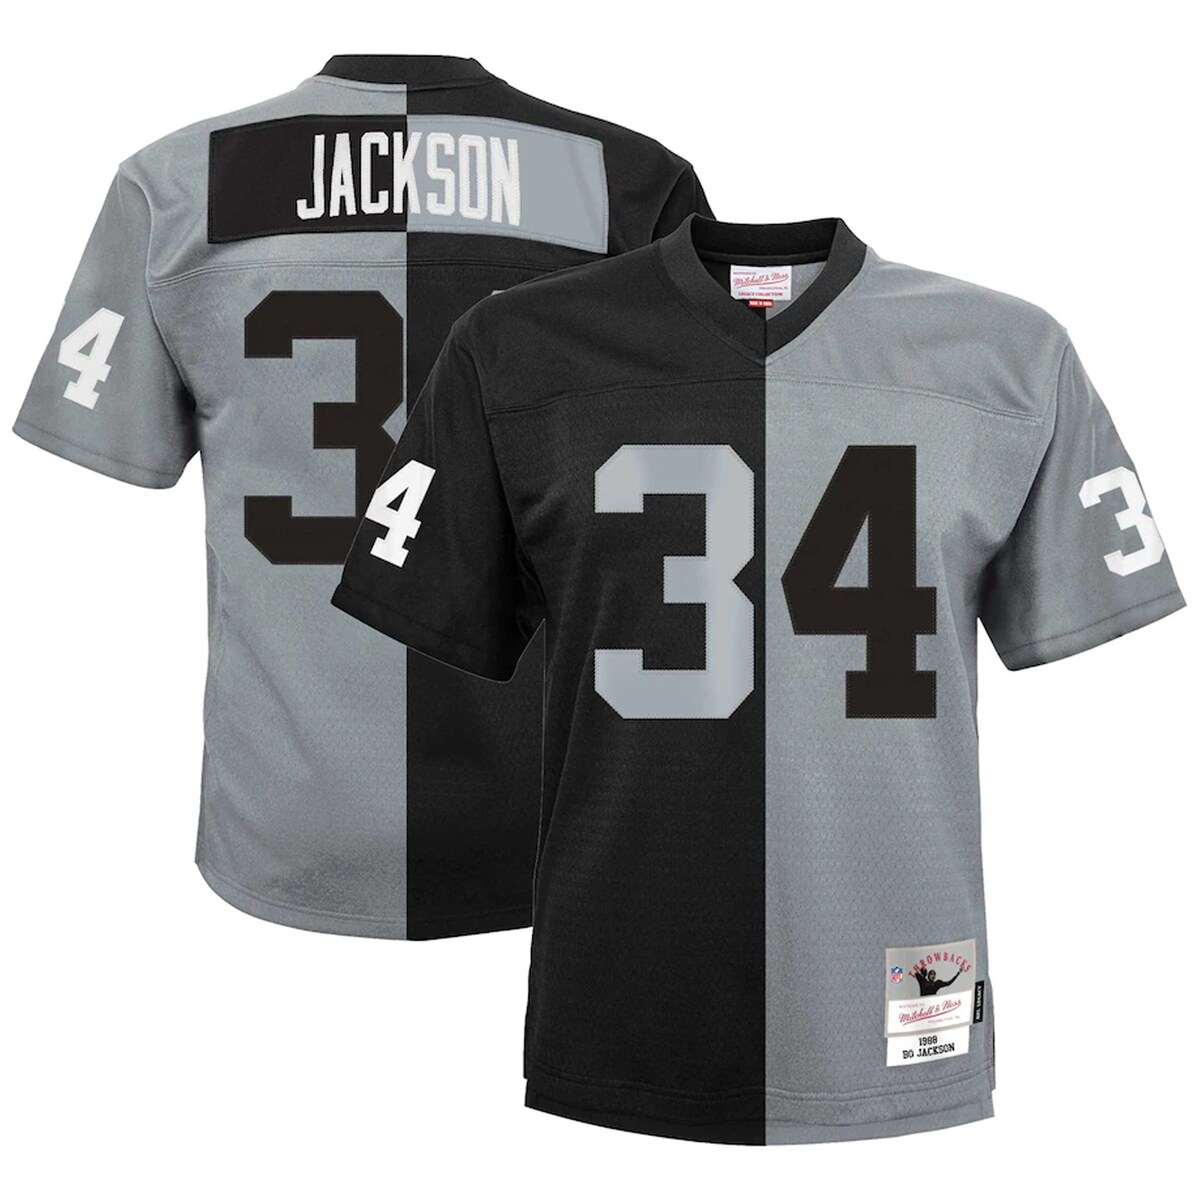 Showcase your kiddo's love for one of the greatest players of all-time in a fresh and unique way with this Bo Jackson Las Vegas Raiders Split Legacy jersey from Mitchell & Ness. This contrasting jersey design features Bo Jackson's name and number across multiple colors and trims. Whether their team is on their home turf or in front of a raucous road crowd, this stylish jersey helps your young fan look the part alongside their beloved Las Vegas Raiders.Replica Throwback JerseyOfficially licensedShort sleeveWoven tags at bottom hemMachine wash, line dryImportedMaterial: 100% PolyesterSide splits at waist hemBrand: Mitchell & NessV-neckTackle twill graphicsMesh fabric